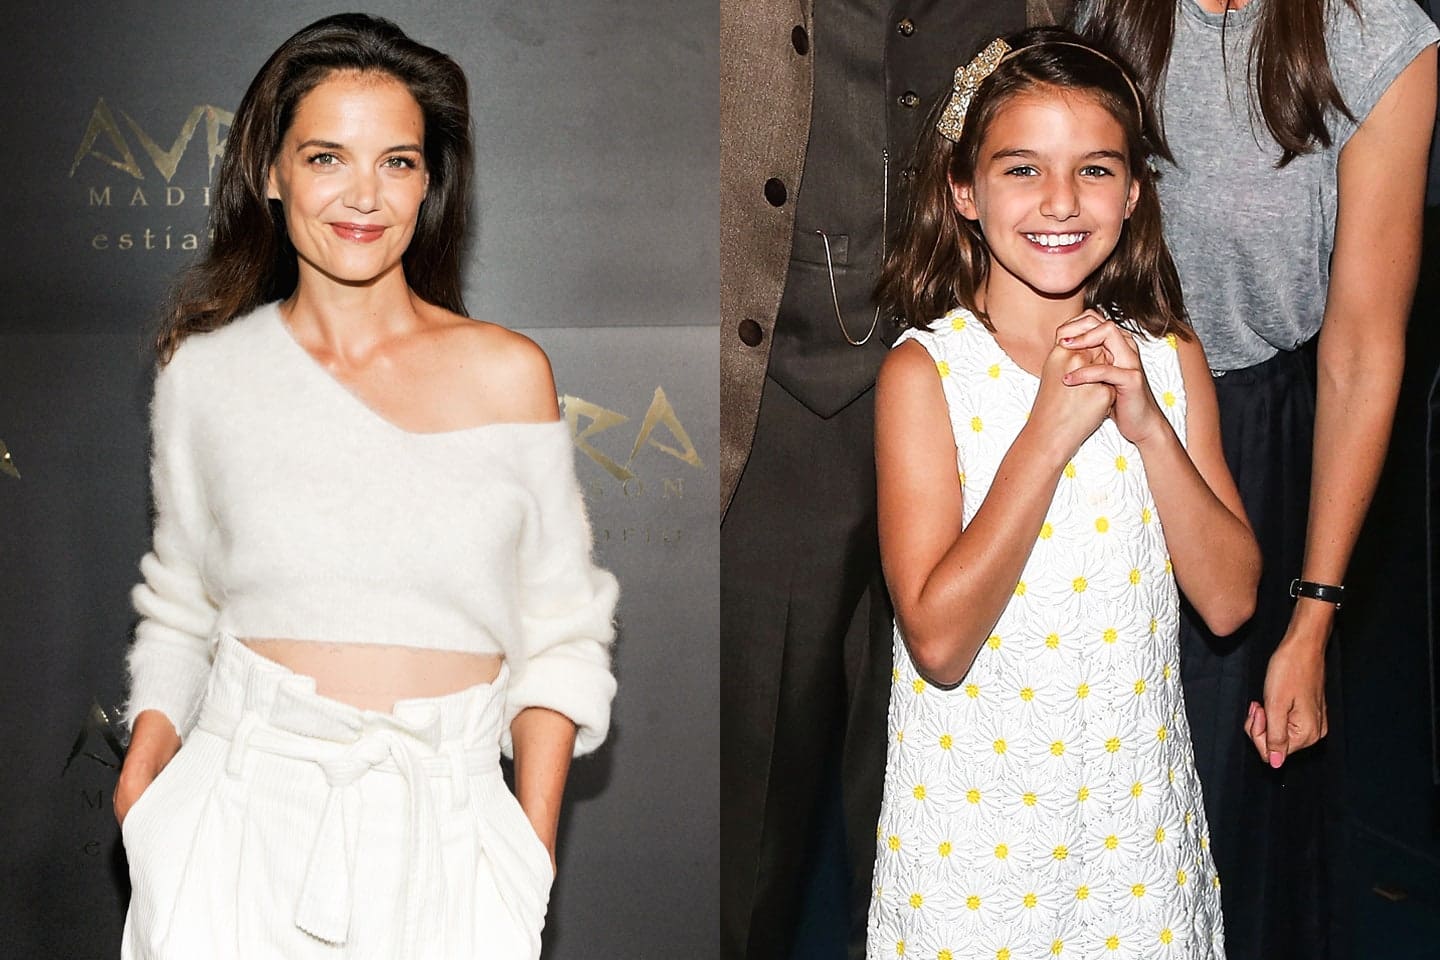 suri-cruise-looks-like-her-mom-katie-holmes-spitting-image-in-new-pics